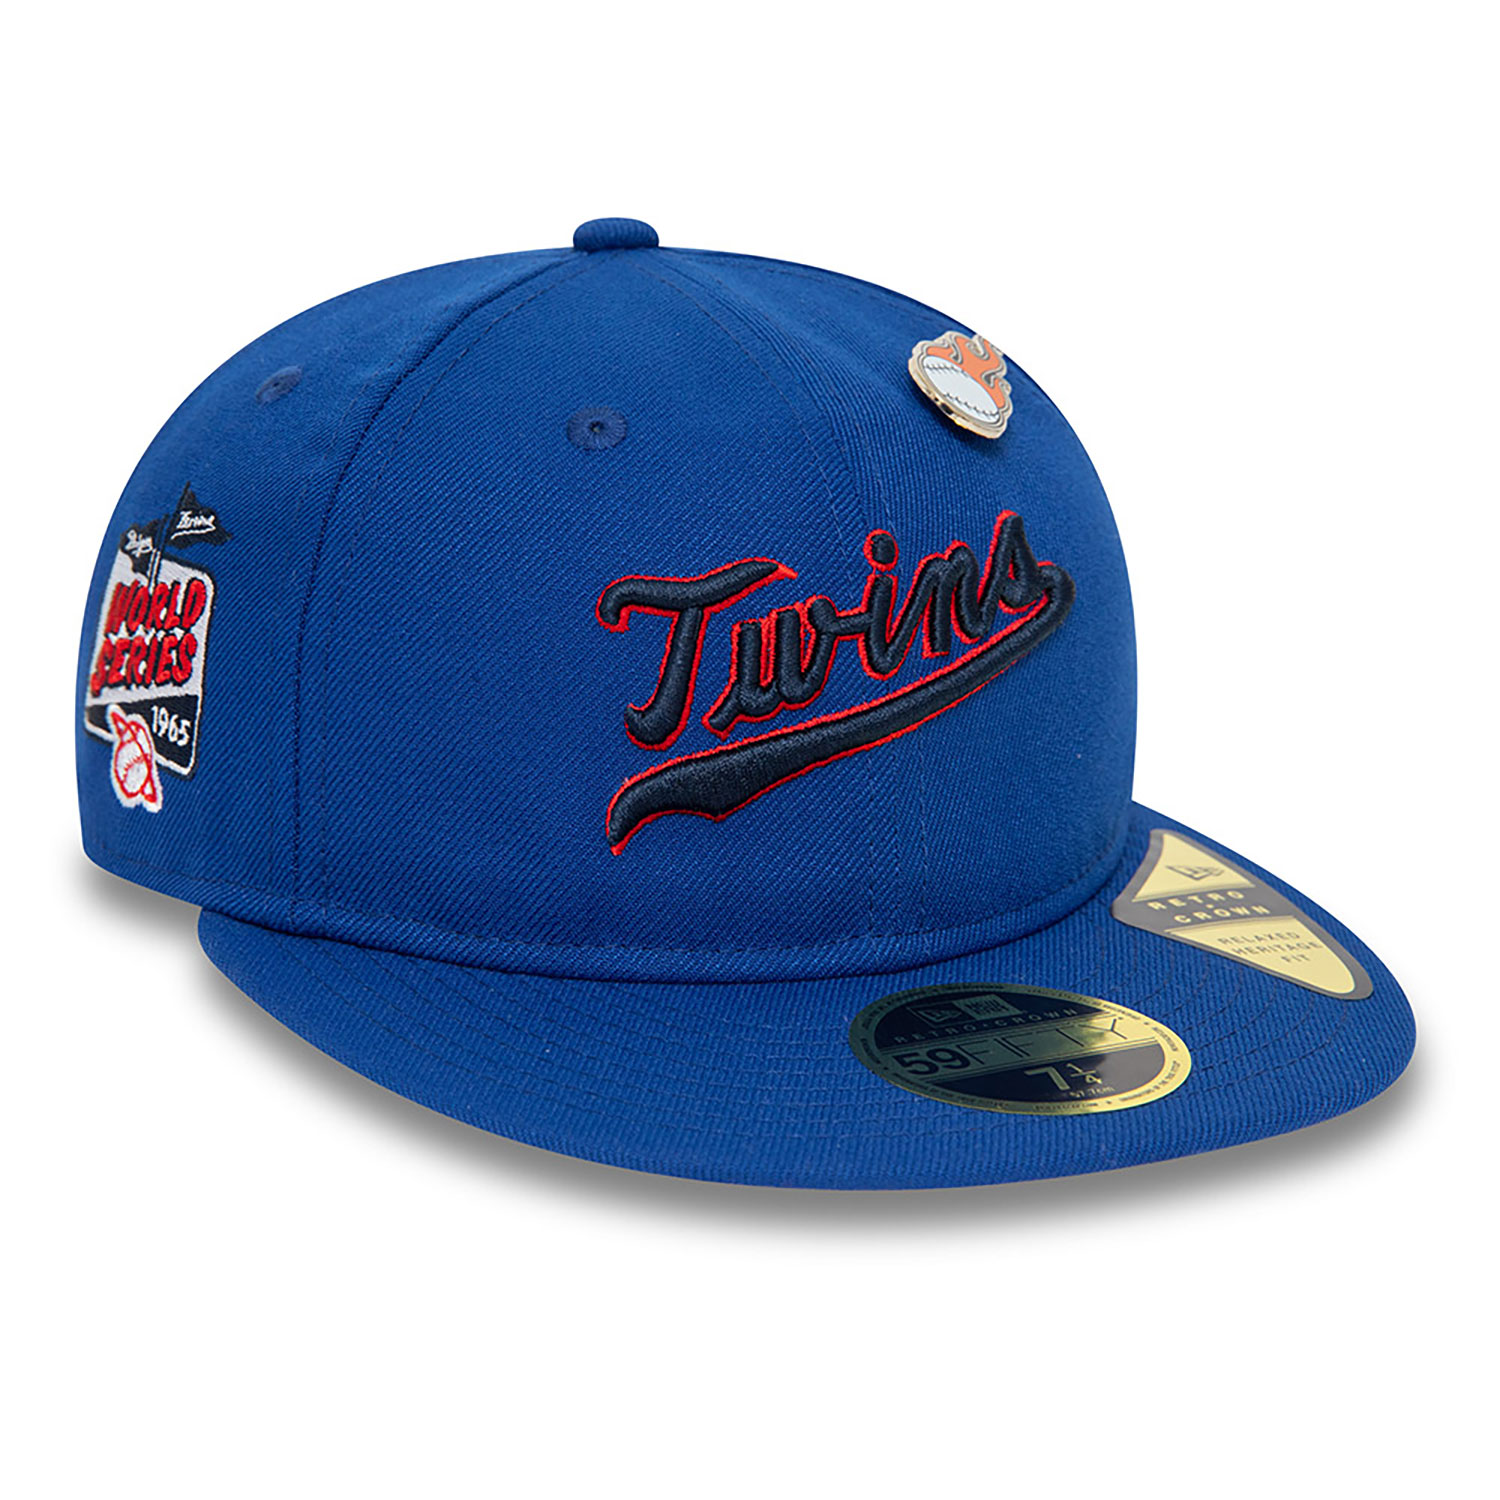 Minnesota Twins MLB Cooperstown Pin Badge Blue 59FIFTY Retro Crown Fitted Cap